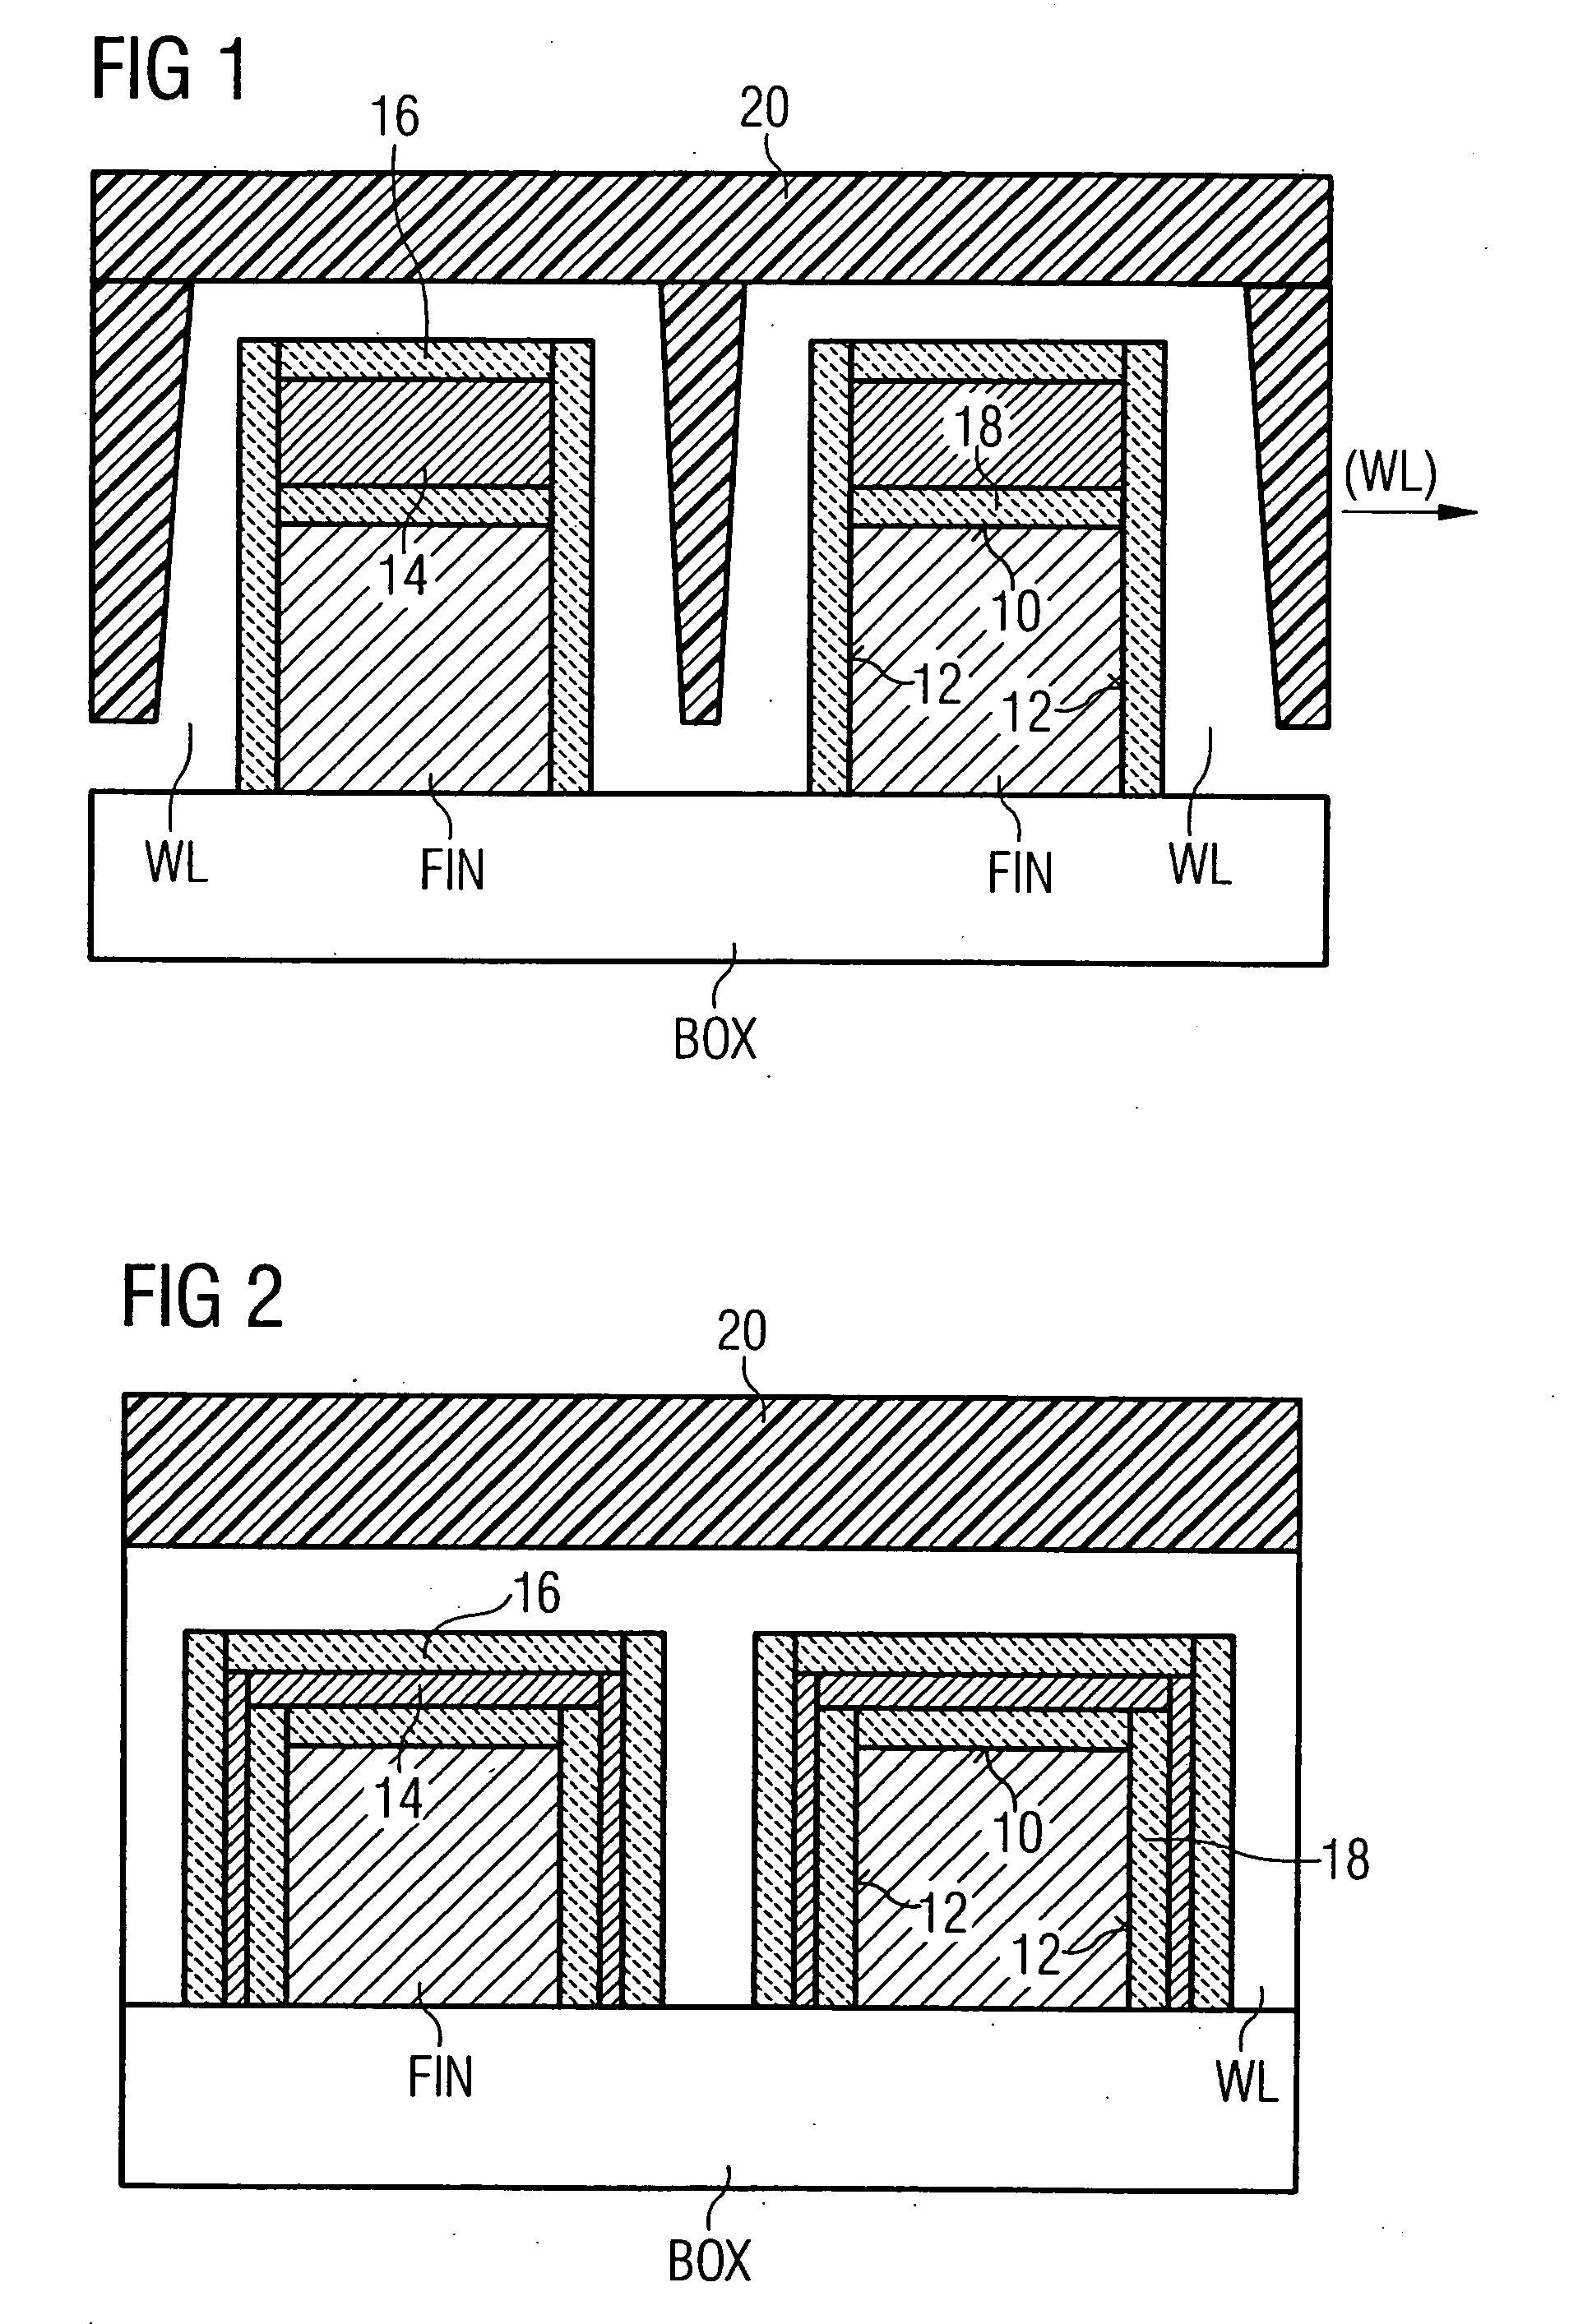 Word and bit line arrangement for a FinFET semiconductor memory